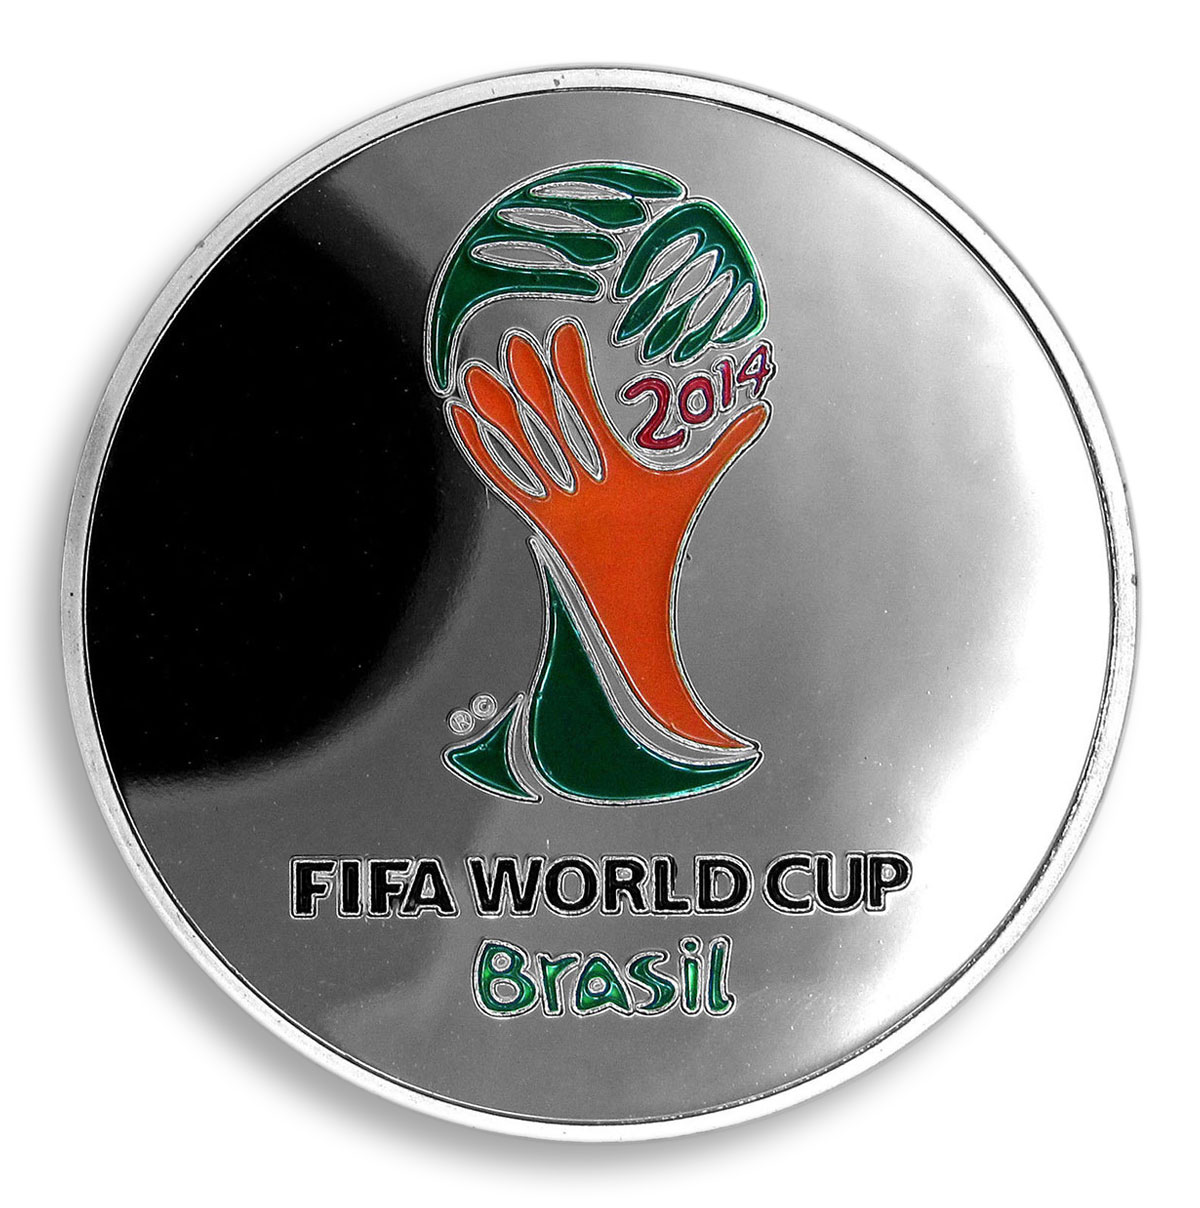 Football World Cup 2014, Robben, Brazil, FIFA, Colorized, Silver Plated, Token